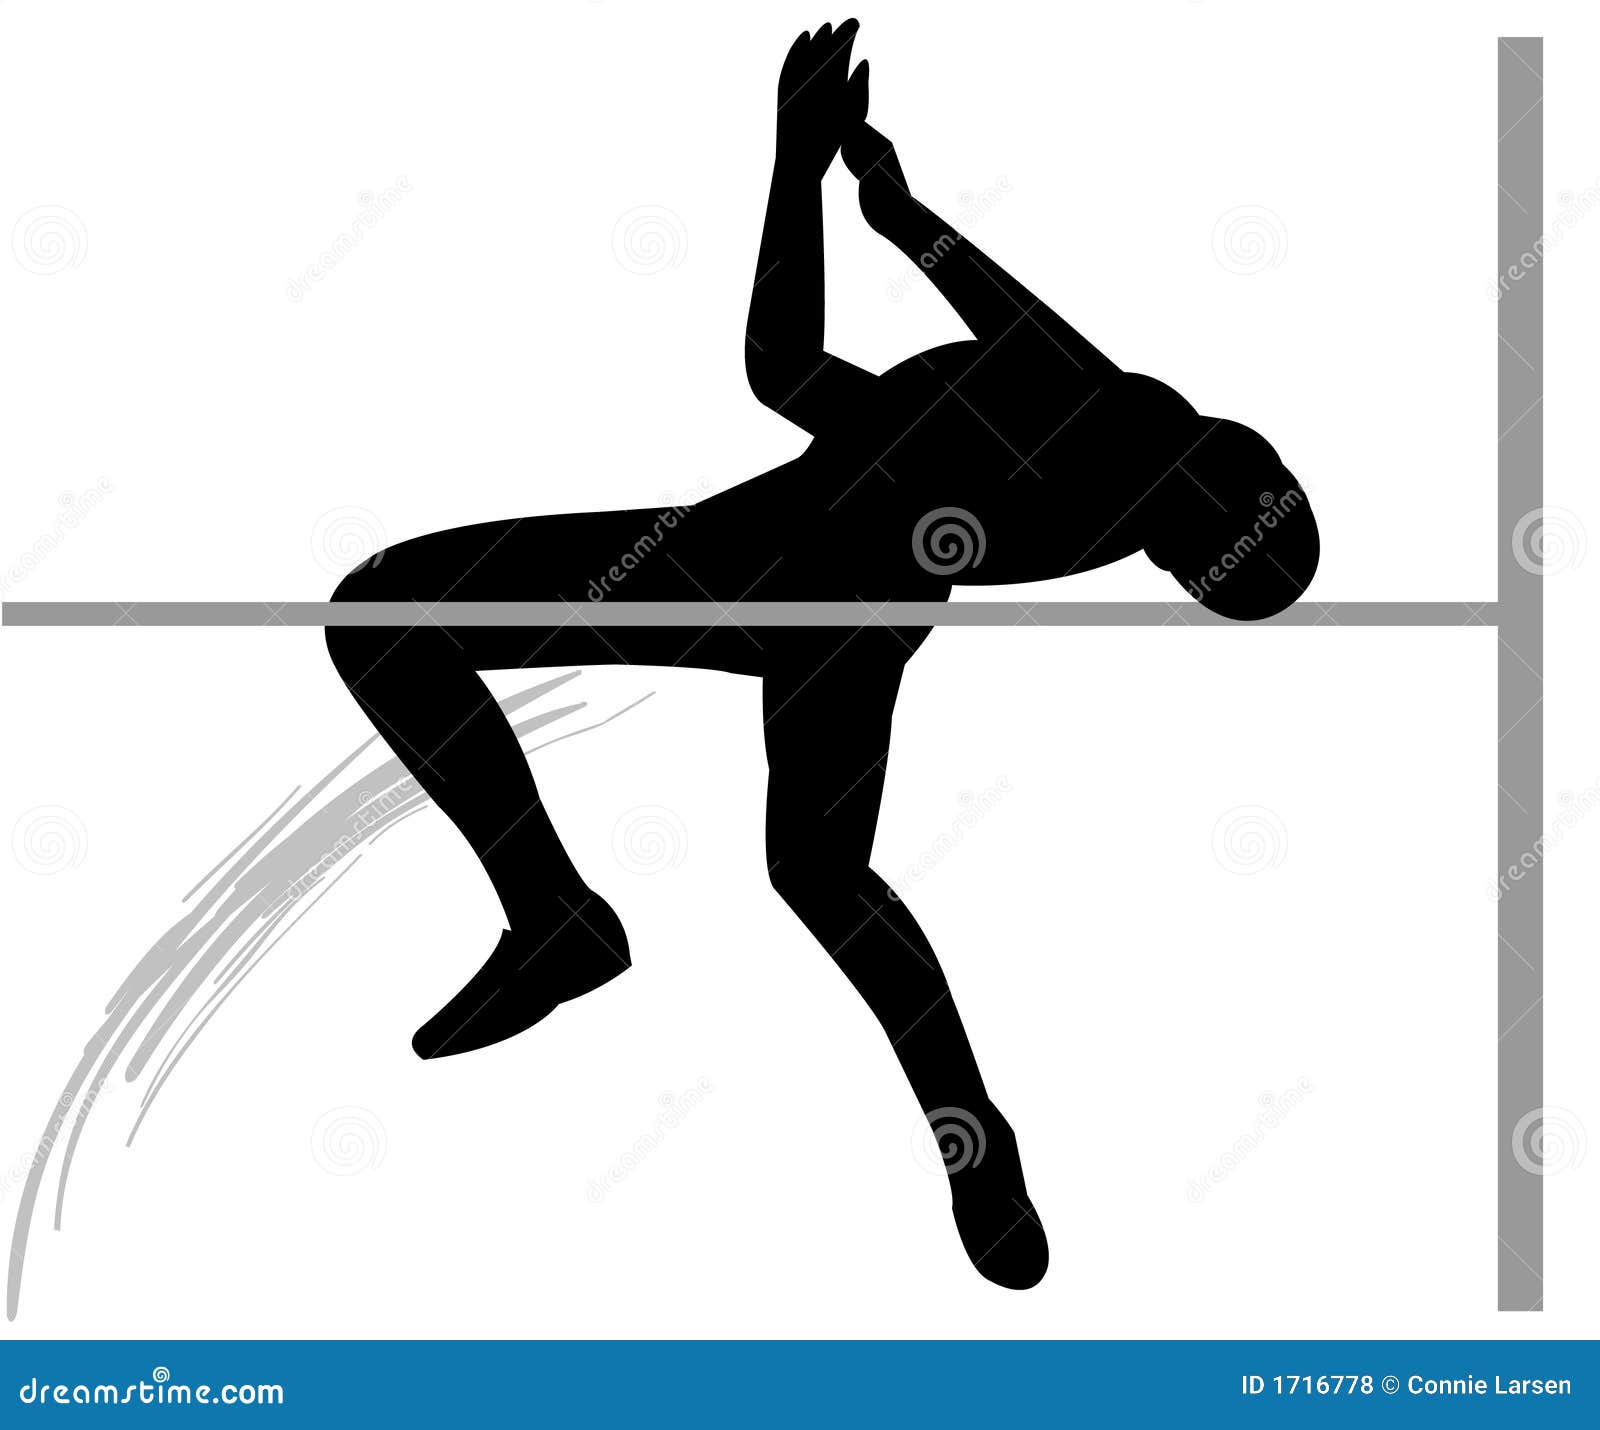 high jump clipart images - photo #18